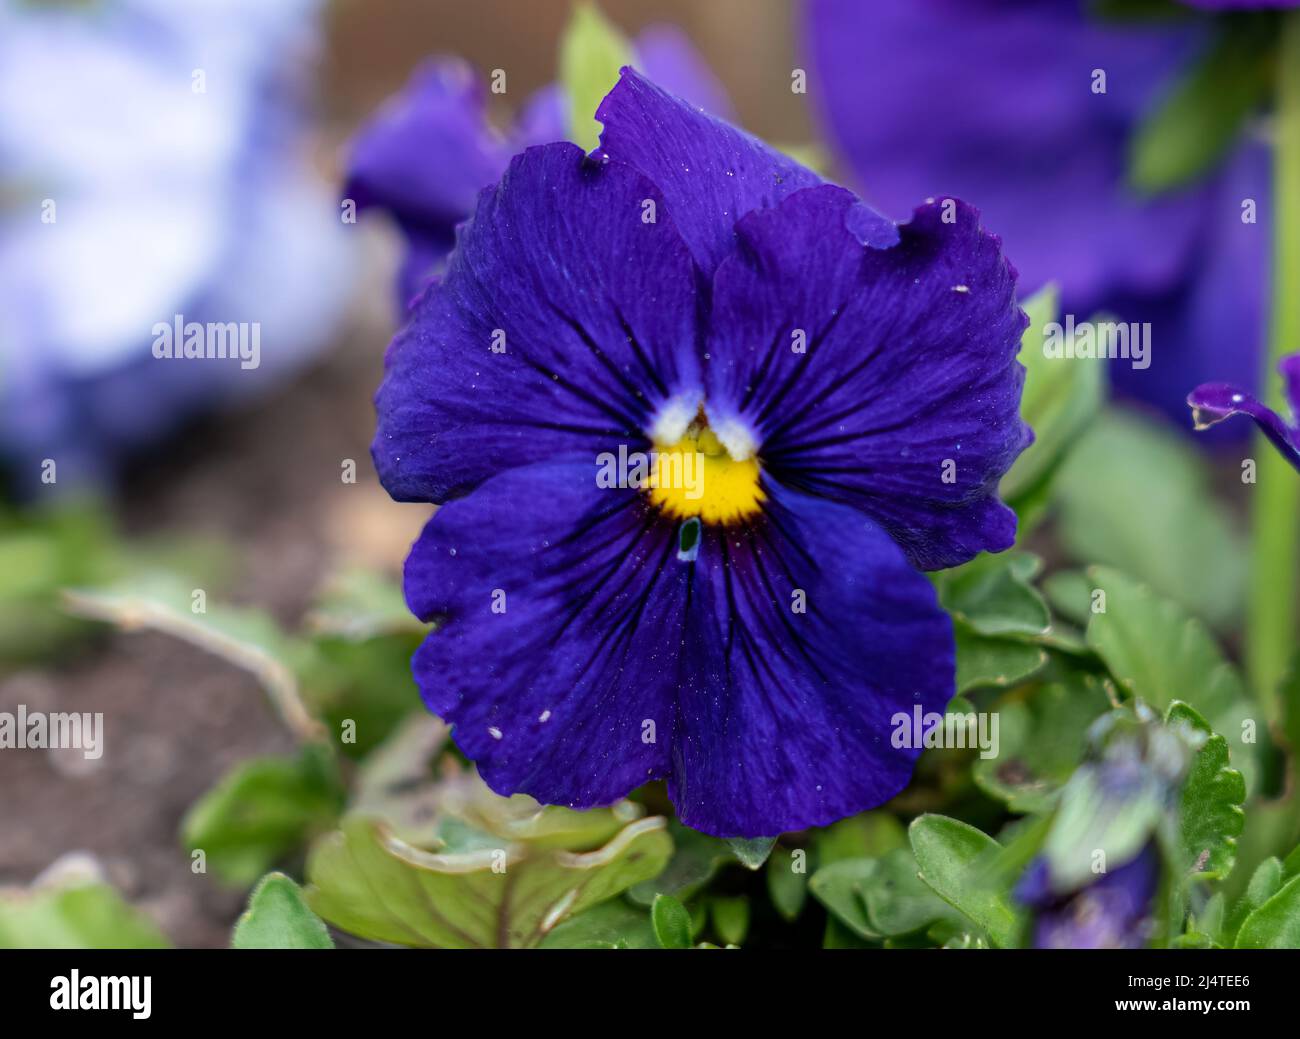 close up of a beautiful spring flowering blue Pansies (Viola tricolor var. hortensis) Stock Photo